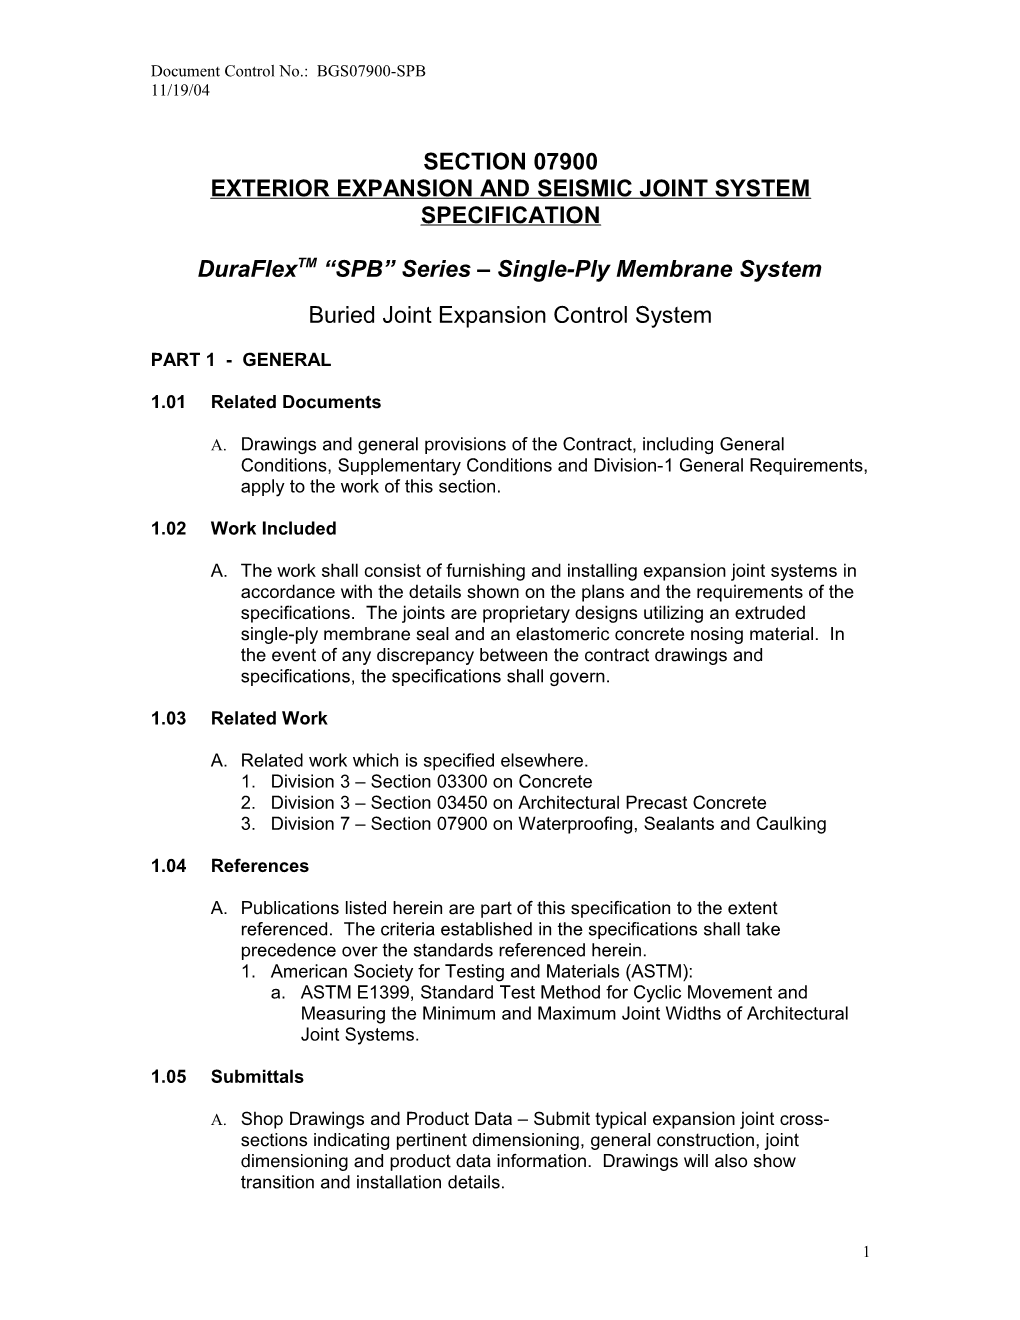 Exterior Expansion and Seismic Joint System Specification